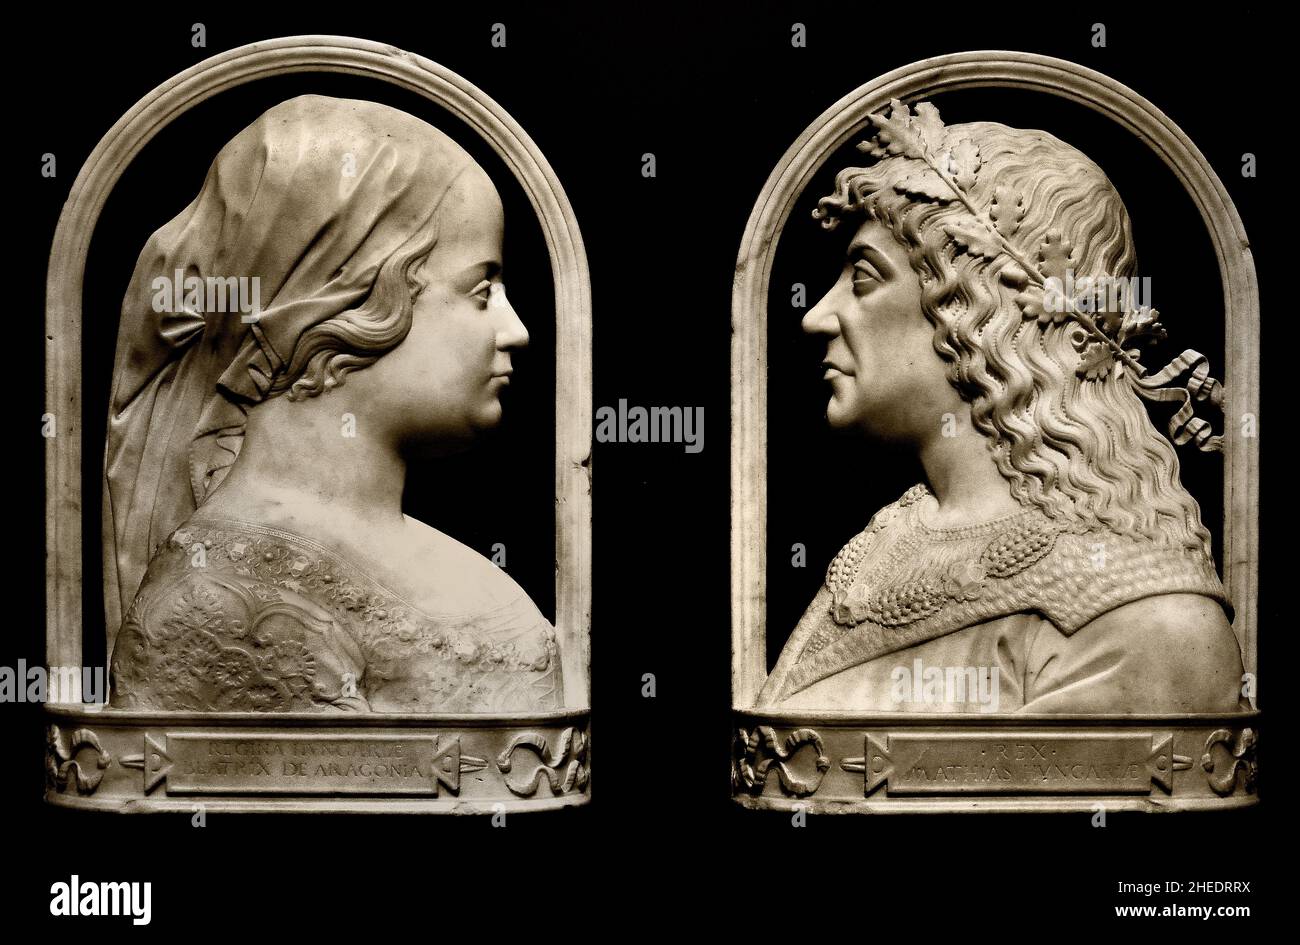 Beatrice of Aragon, queen consort of Hungary  and Matthias Corvinus, King of Hungary 1476 bust relief by Benedetto da Maiano (Florence, 1442 - 1497) was an Italian sculptor of the Early Renaissance.  Italian, Italy, Stock Photo